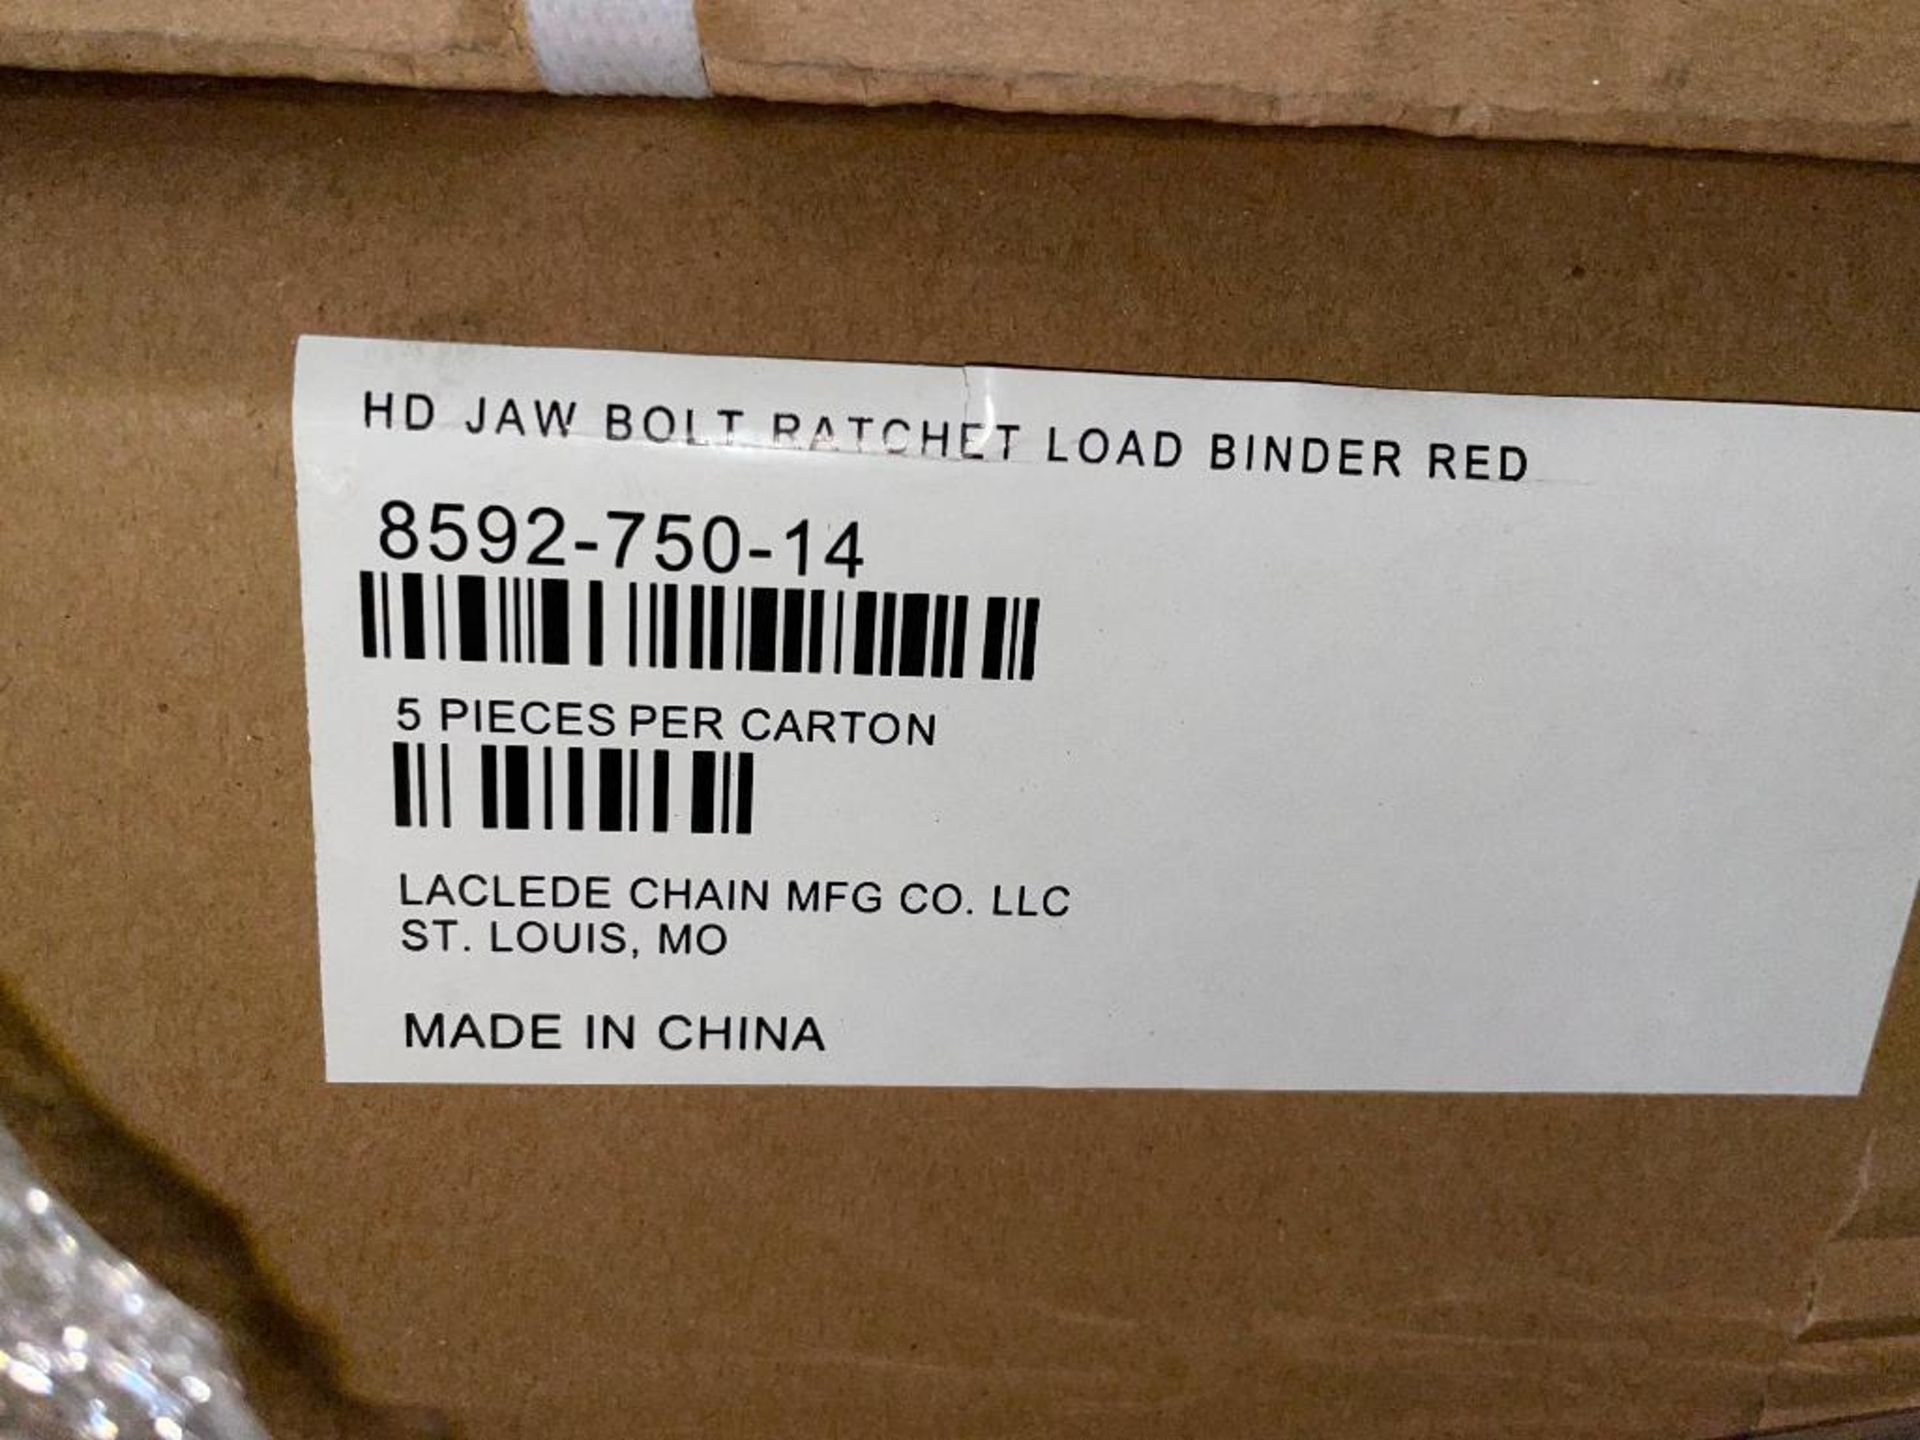 DESCRIPTION: (2) CASES OF HD JAW BOLT RATCHET LOAD BINDERS - RED. 5 PER CASE, 10 IN LOT TOTAL. BRAND - Image 7 of 8